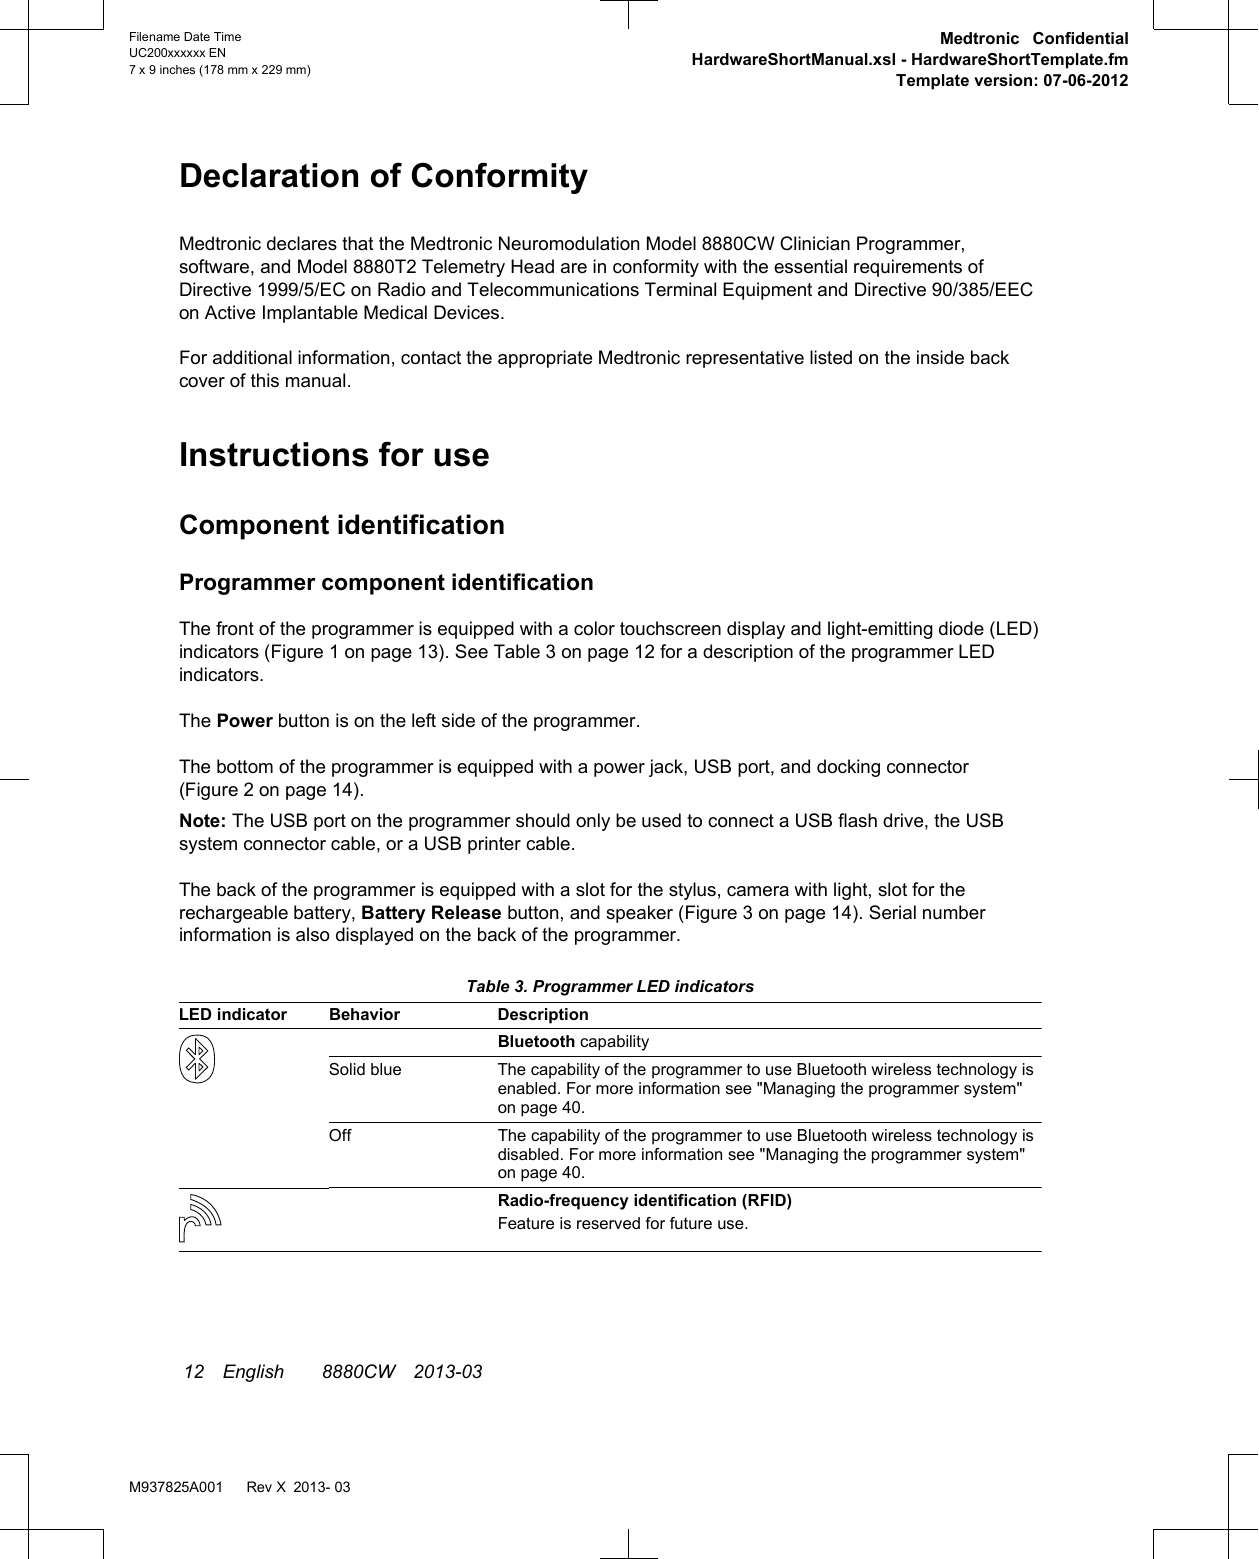 Declaration of ConformityMedtronic declares that the Medtronic Neuromodulation Model 8880CW Clinician Programmer,software, and Model 8880T2 Telemetry Head are in conformity with the essential requirements ofDirective 1999/5/EC on Radio and Telecommunications Terminal Equipment and Directive 90/385/EECon Active Implantable Medical Devices.For additional information, contact the appropriate Medtronic representative listed on the inside backcover of this manual.Instructions for useComponent identificationProgrammer component identificationThe front of the programmer is equipped with a color touchscreen display and light-emitting diode (LED)indicators (Figure 1 on page 13). See Table 3 on page 12 for a description of the programmer LEDindicators.The Power button is on the left side of the programmer.The bottom of the programmer is equipped with a power jack, USB port, and docking connector(Figure 2 on page 14).Note: The USB port on the programmer should only be used to connect a USB flash drive, the USBsystem connector cable, or a USB printer cable.The back of the programmer is equipped with a slot for the stylus, camera with light, slot for therechargeable battery, Battery Release button, and speaker (Figure 3 on page 14). Serial numberinformation is also displayed on the back of the programmer. Table 3. Programmer LED indicatorsLED indicator Behavior DescriptionBluetooth capabilitySolid blue The capability of the programmer to use Bluetooth wireless technology isenabled. For more information see &quot;Managing the programmer system&quot;on page 40.Off The capability of the programmer to use Bluetooth wireless technology isdisabled. For more information see &quot;Managing the programmer system&quot;on page 40.Radio-frequency identification (RFID)Feature is reserved for future use. 12 English  8880CW 2013-03Filename Date TimeUC200xxxxxx EN7 x 9 inches (178 mm x 229 mm)Medtronic ConfidentialHardwareShortManual.xsl - HardwareShortTemplate.fmTemplate version: 07-06-2012M937825A001   Rev X 2013- 03